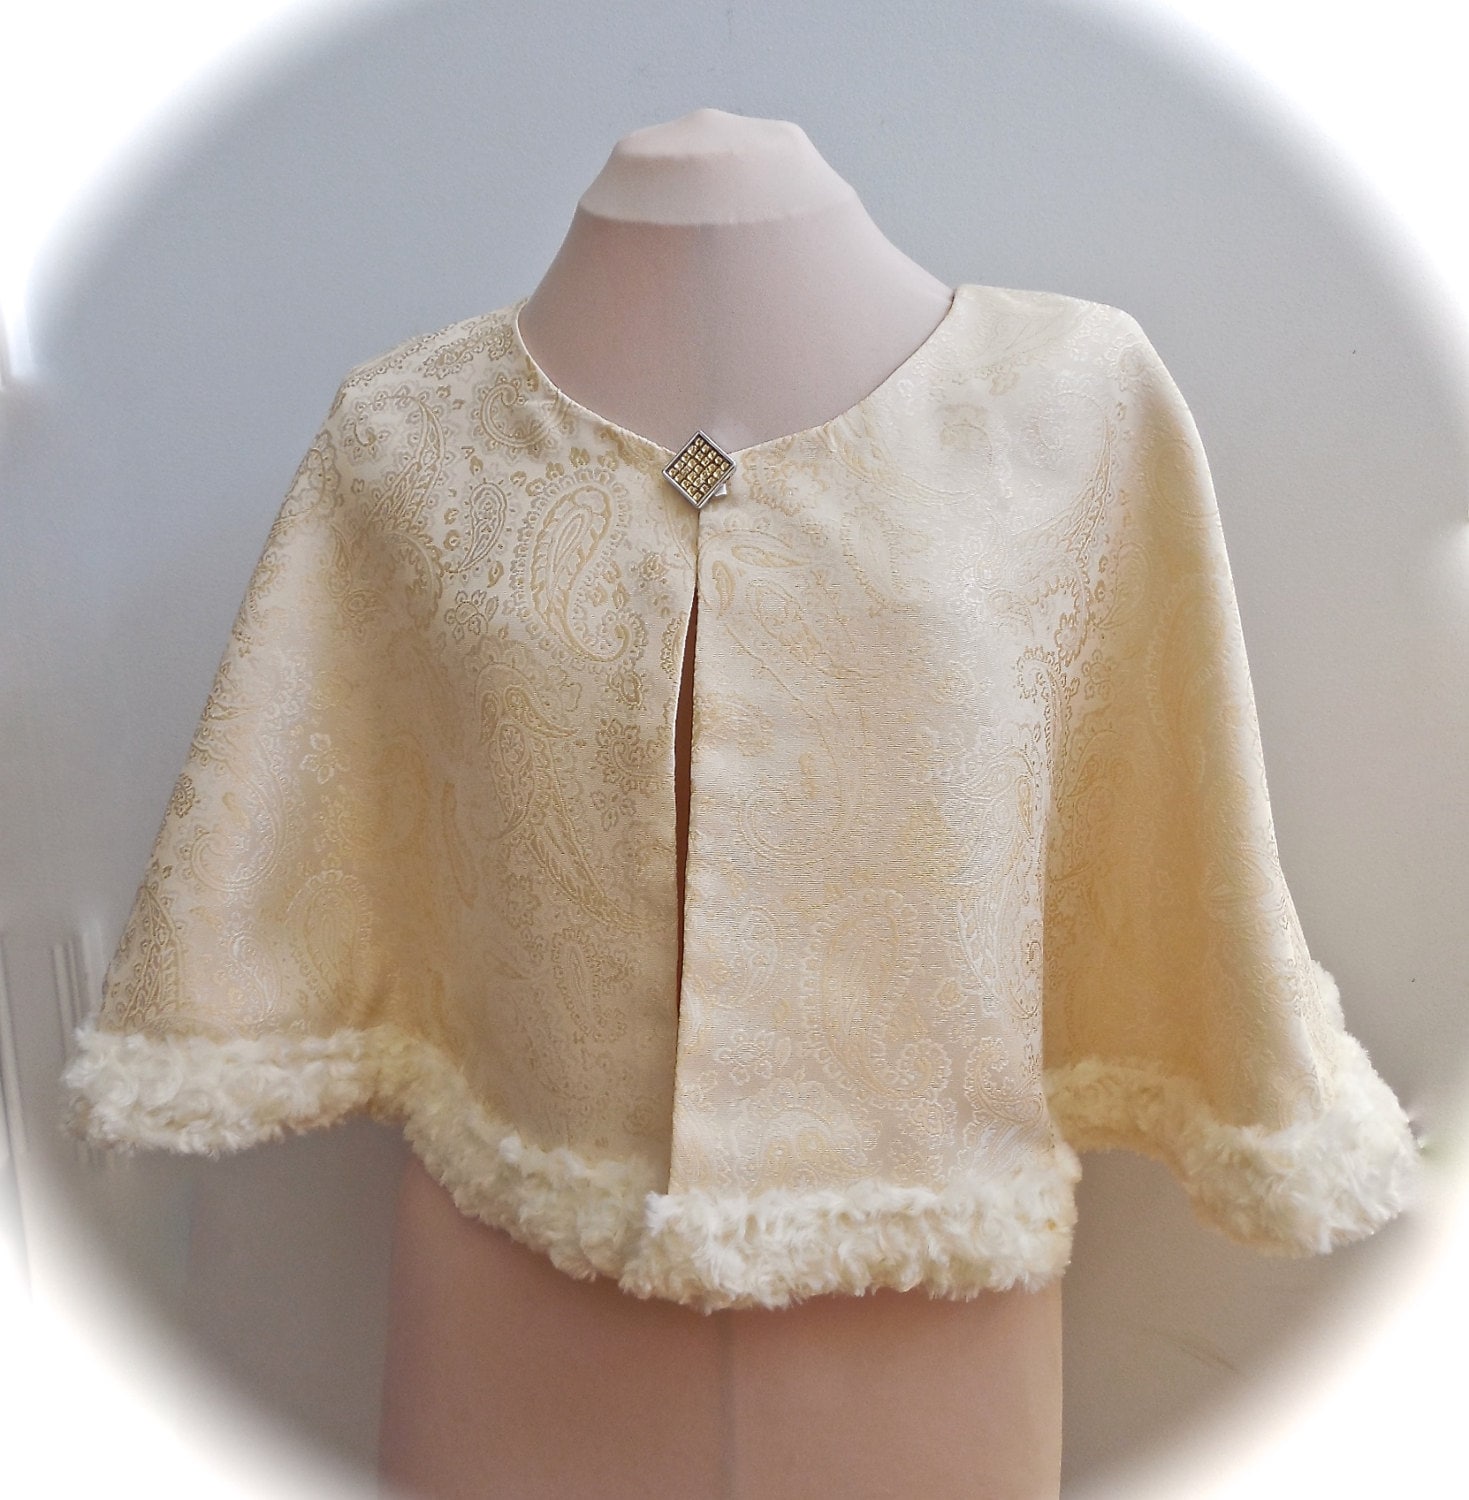 Ivory Brocade Bridal Capelet With Faux Swirled Fur Trim - Etsy